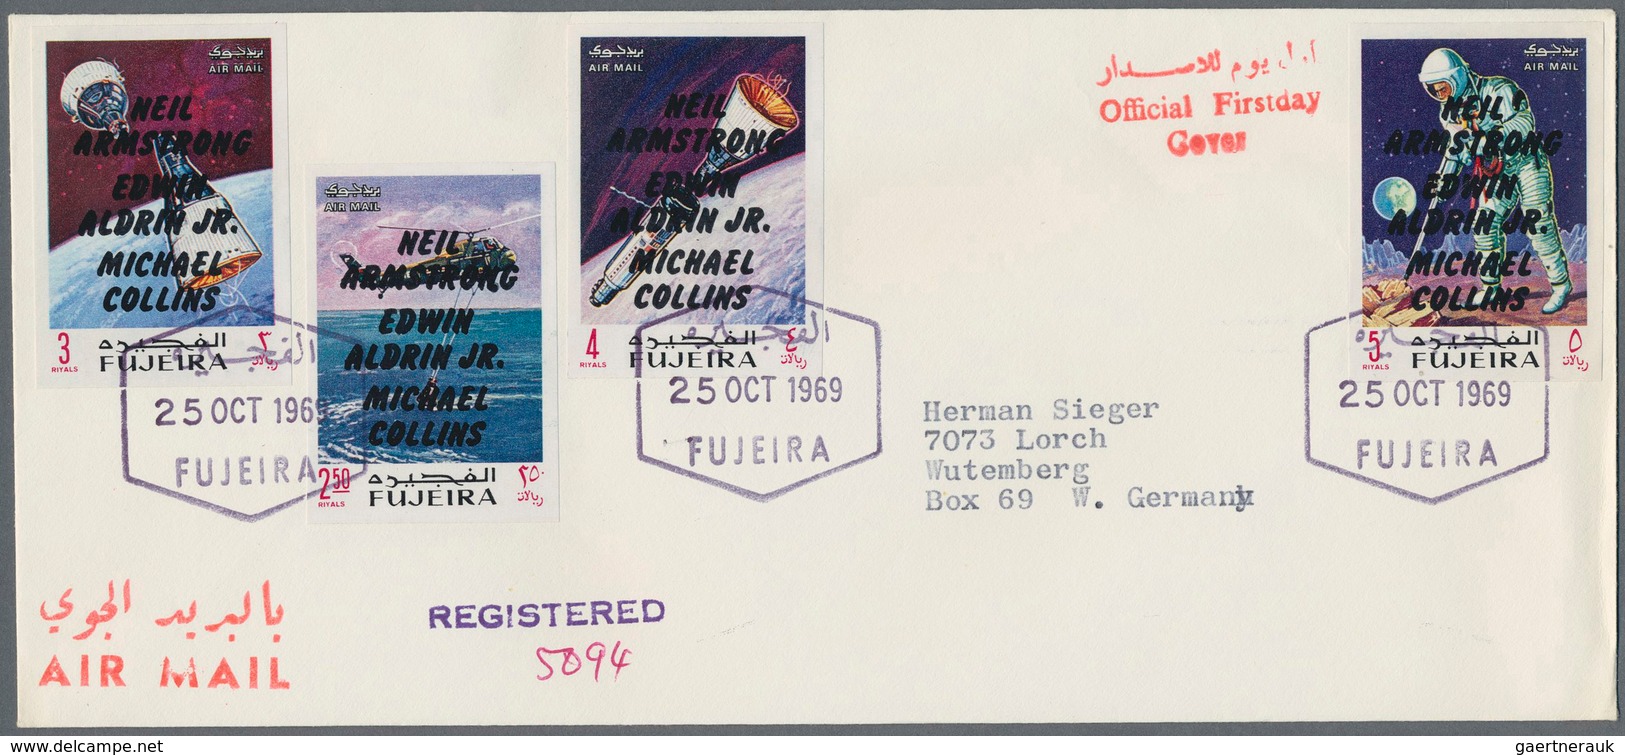 22607 Fudschaira / Fujeira: 1969, APOLLO, group of 18 covers: Michel nos. 399/407 A and A 399/407 A on fou